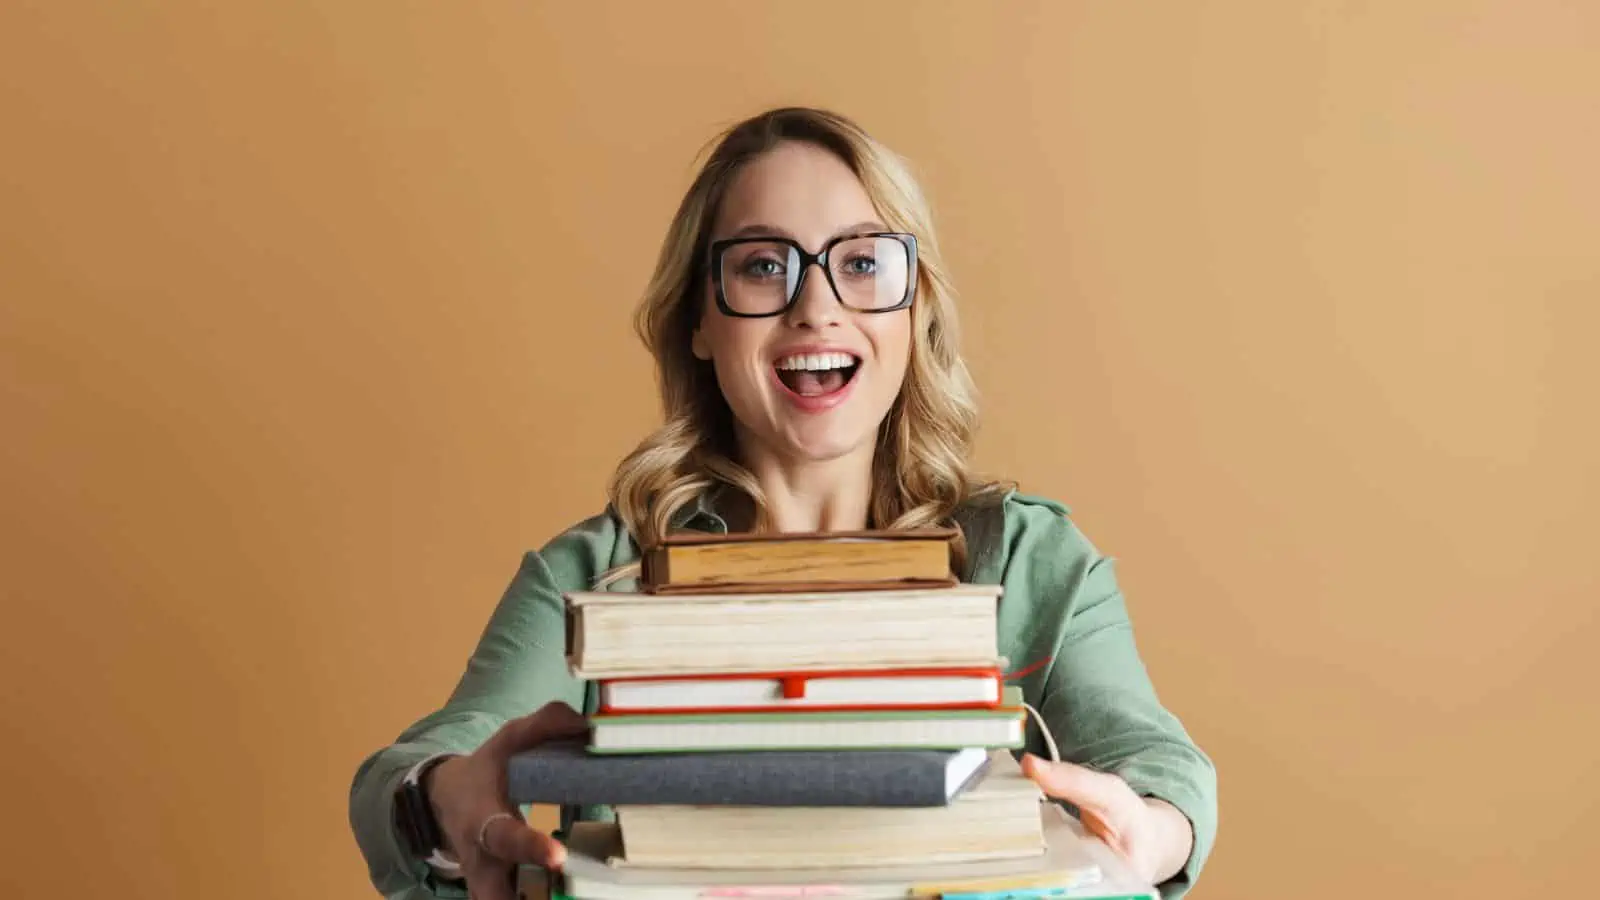 woman wearing glasses and holding a stack of books